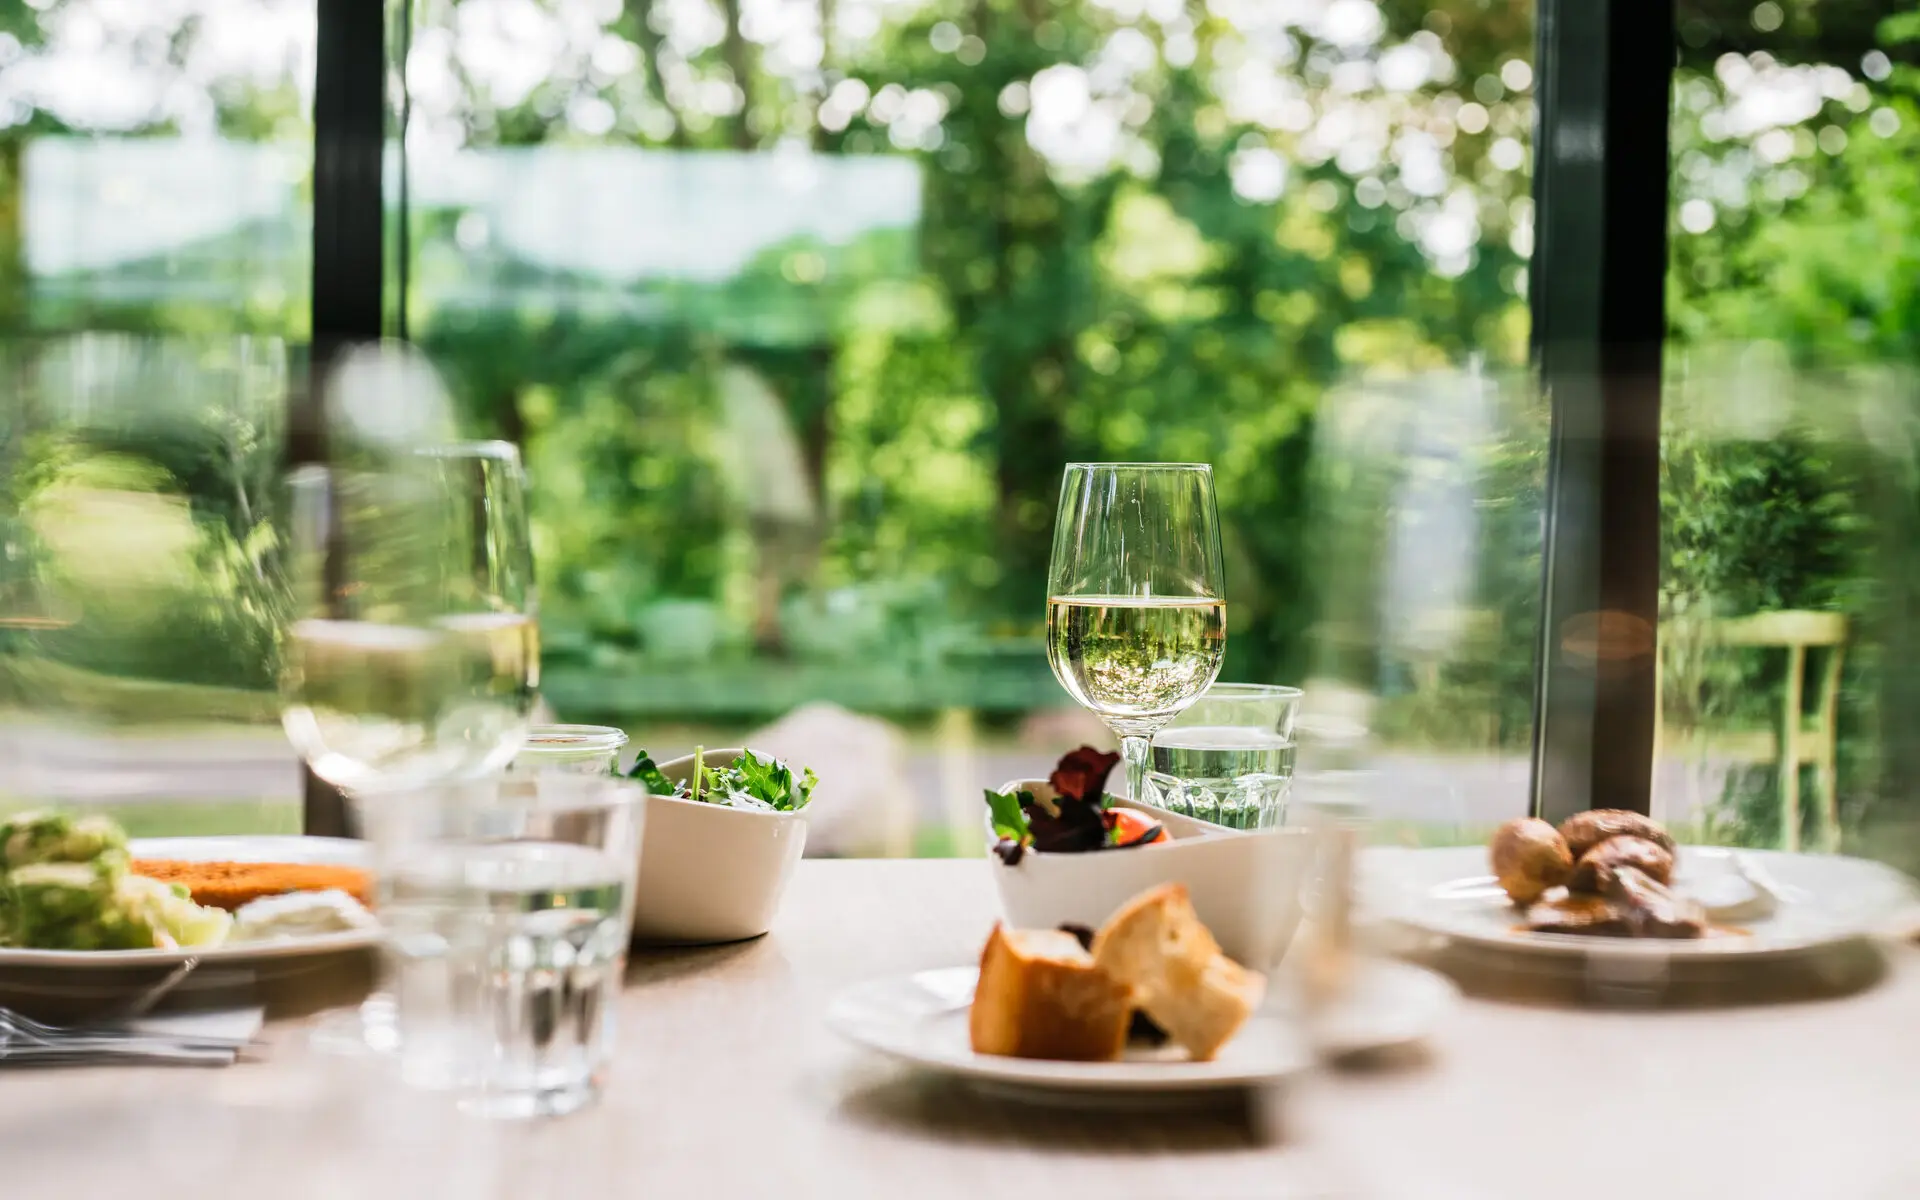 Table set with a variety of dishes and drinks, including wine glasses and plates, under a tree.